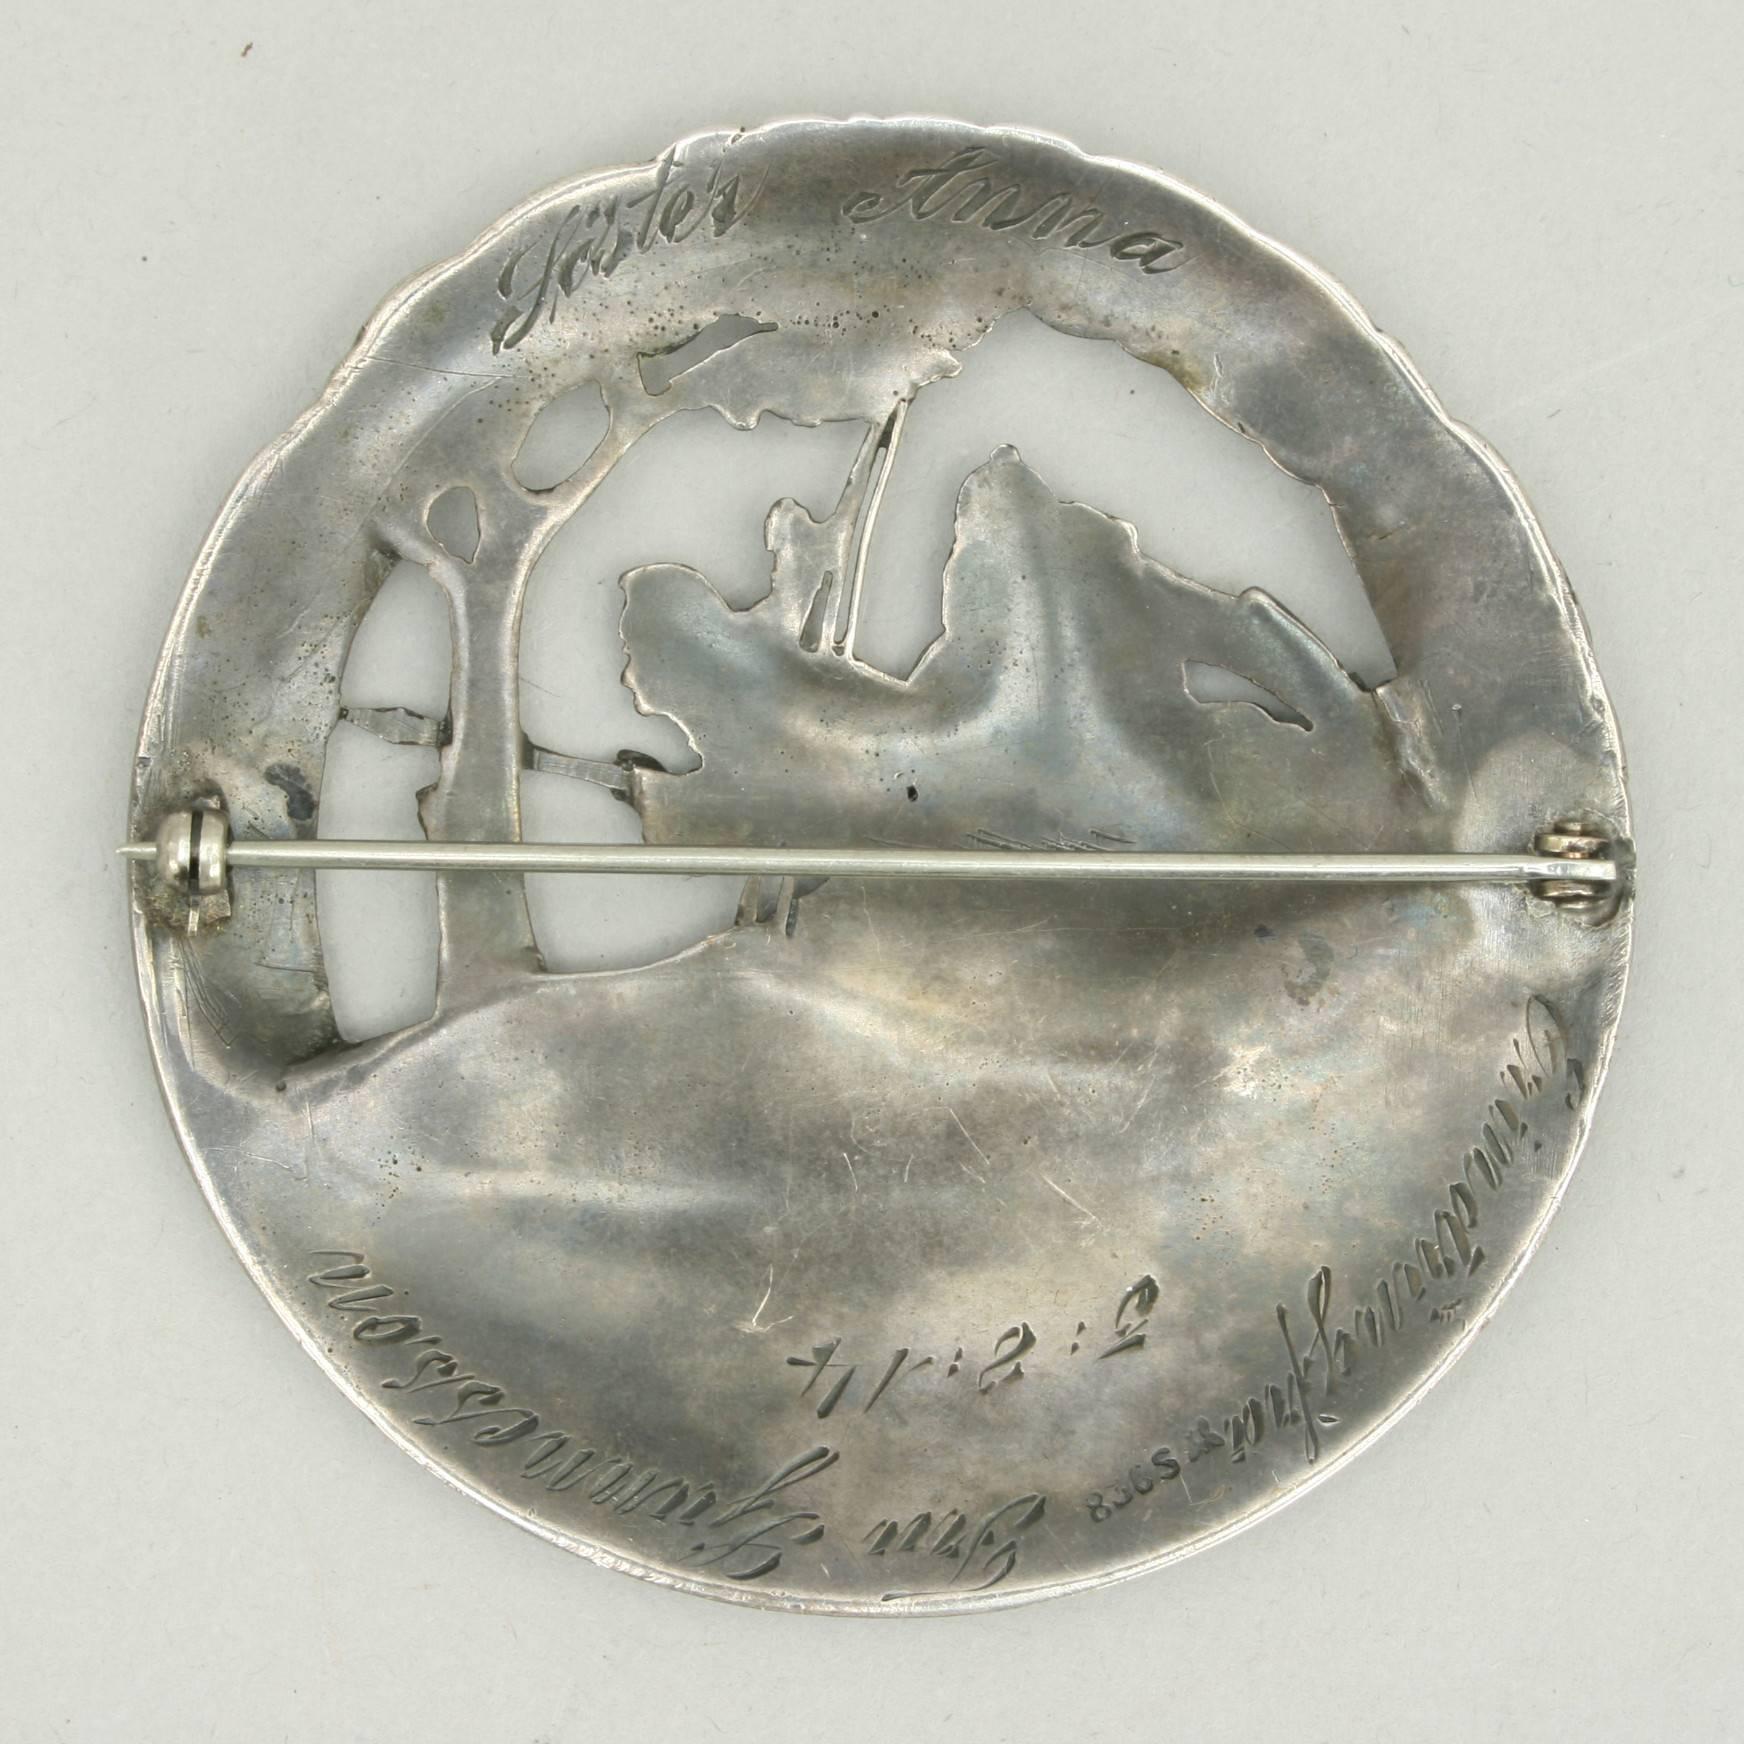 Skiing birchlegs crossing the mountain with the royal child.
An unusual brooch with a scene of skiing Vikings, 'The Birch Legs'. The Norwegian Sterling Brooch is hallmarked '830 S' and is of a very fine casting. Impressed around the outer edge is '